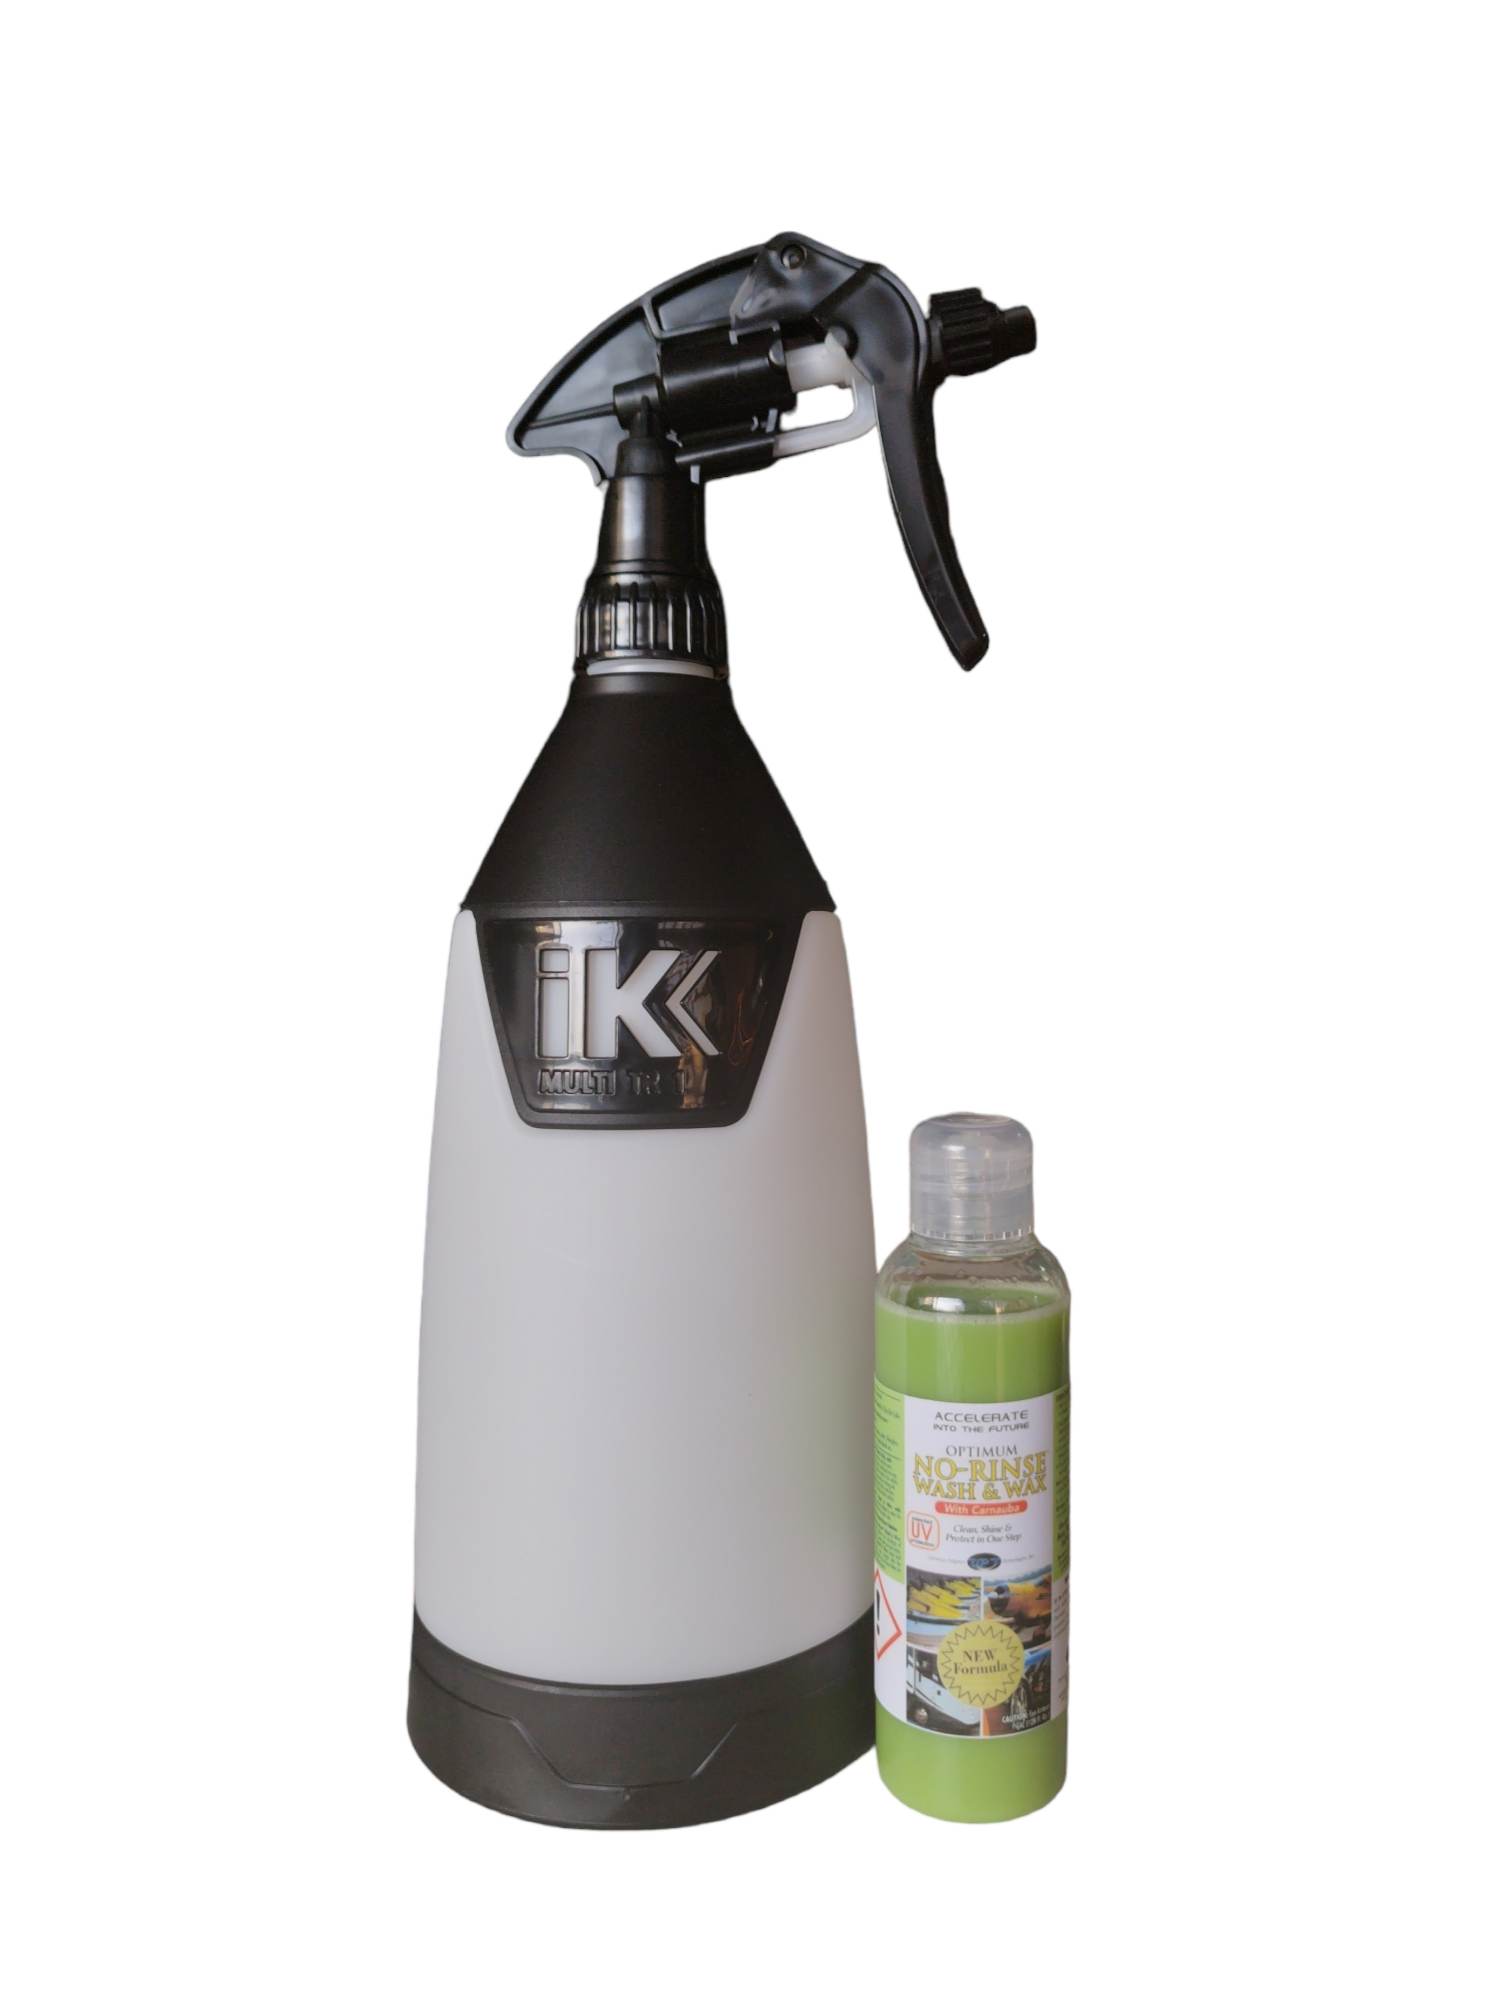  Goizper Group iK Sprayers Goizper Multi TR 1 Trigger Sprayer  Acid and Chemical Resistant, Commercial Grade, Adjustable Nozzle, Perfect  for Automotive Detailing and Cleaning (3) : Automotive